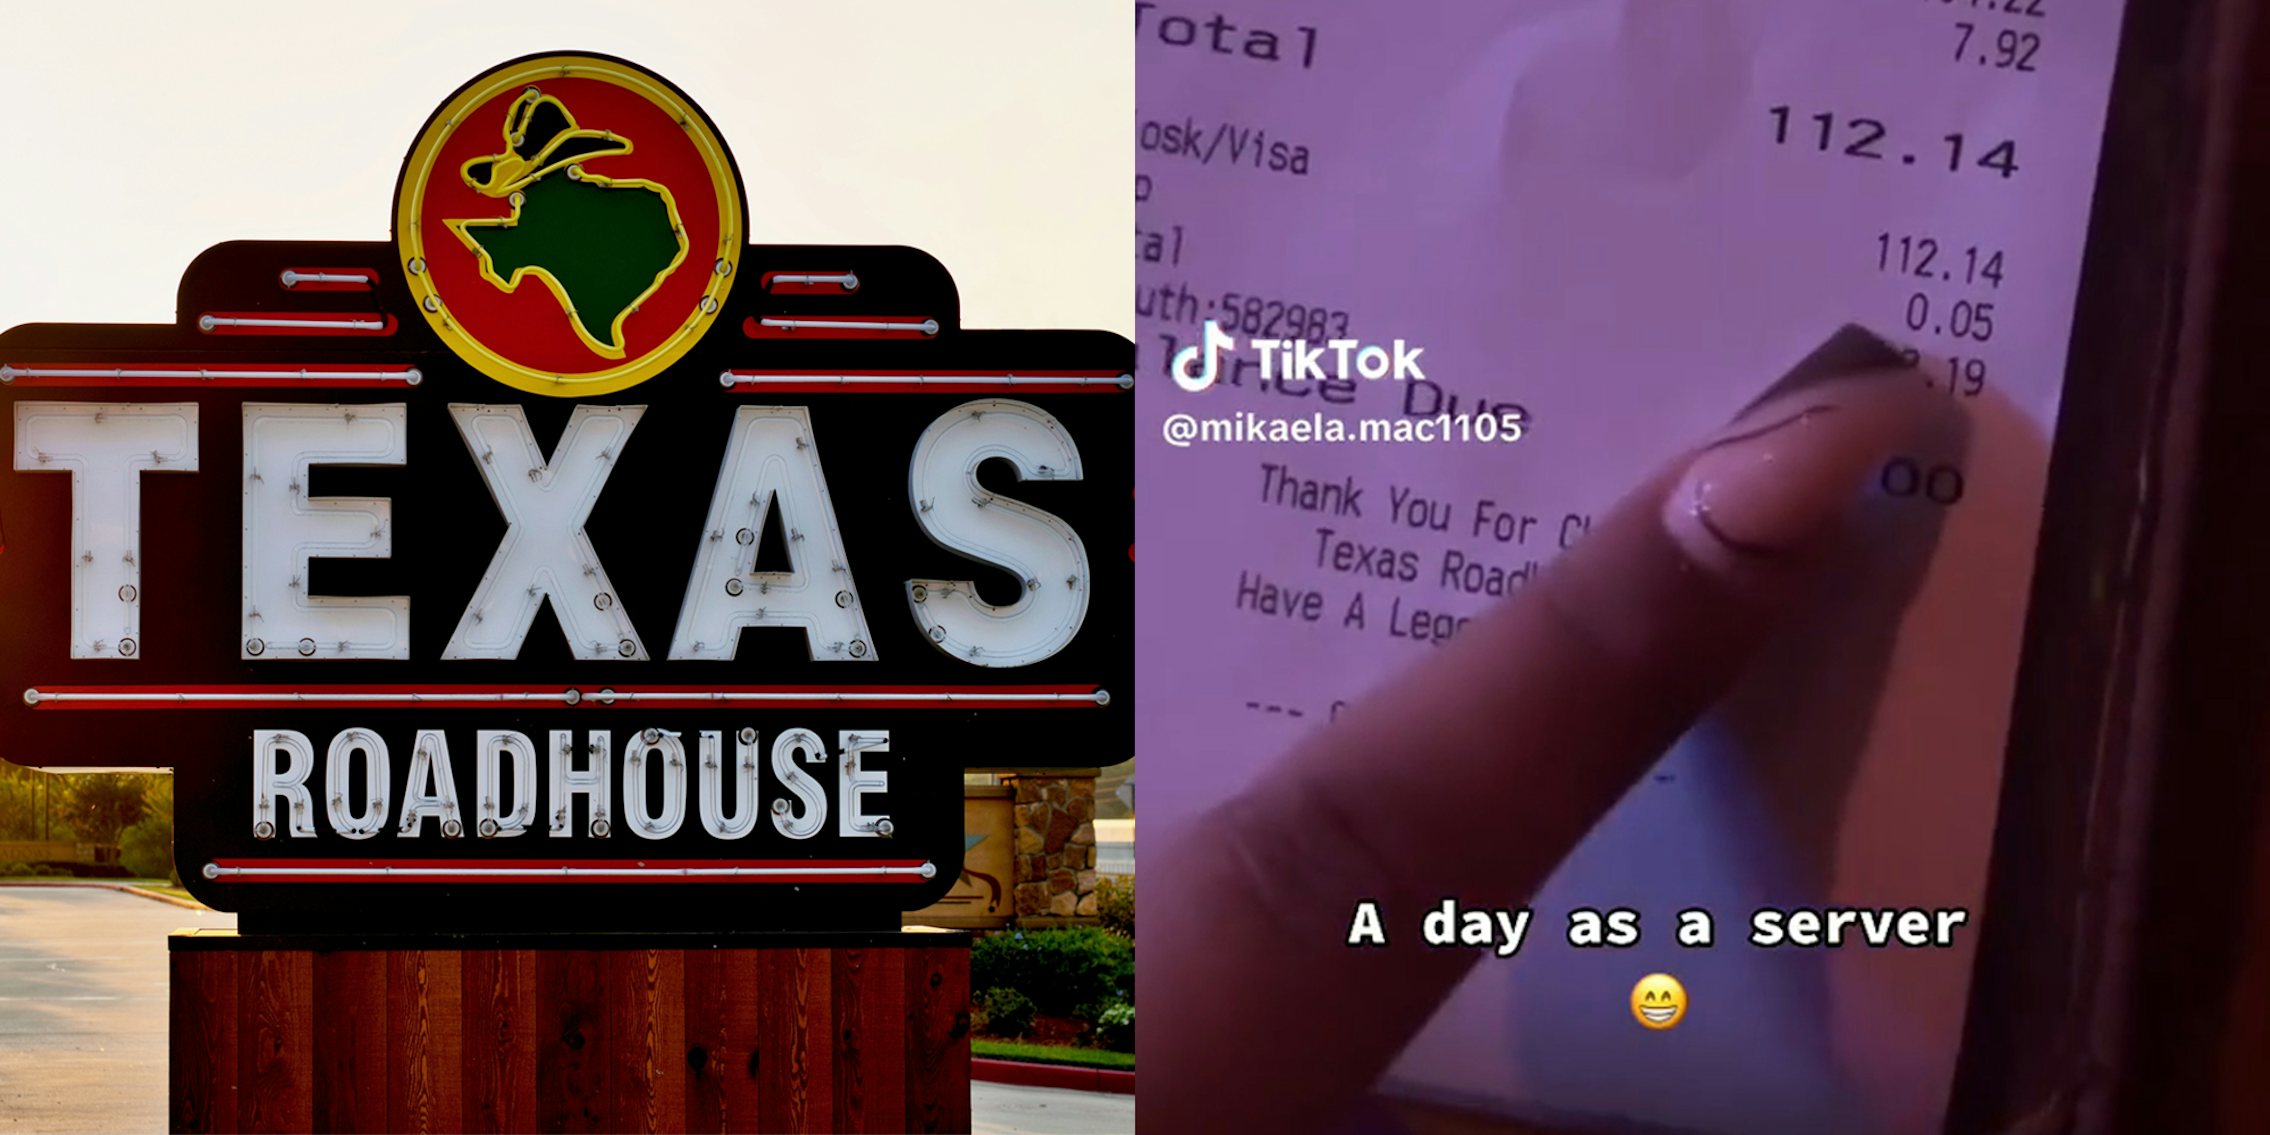 Texas Roadhouse sign (l) woman pointing to $.05 tip (r)